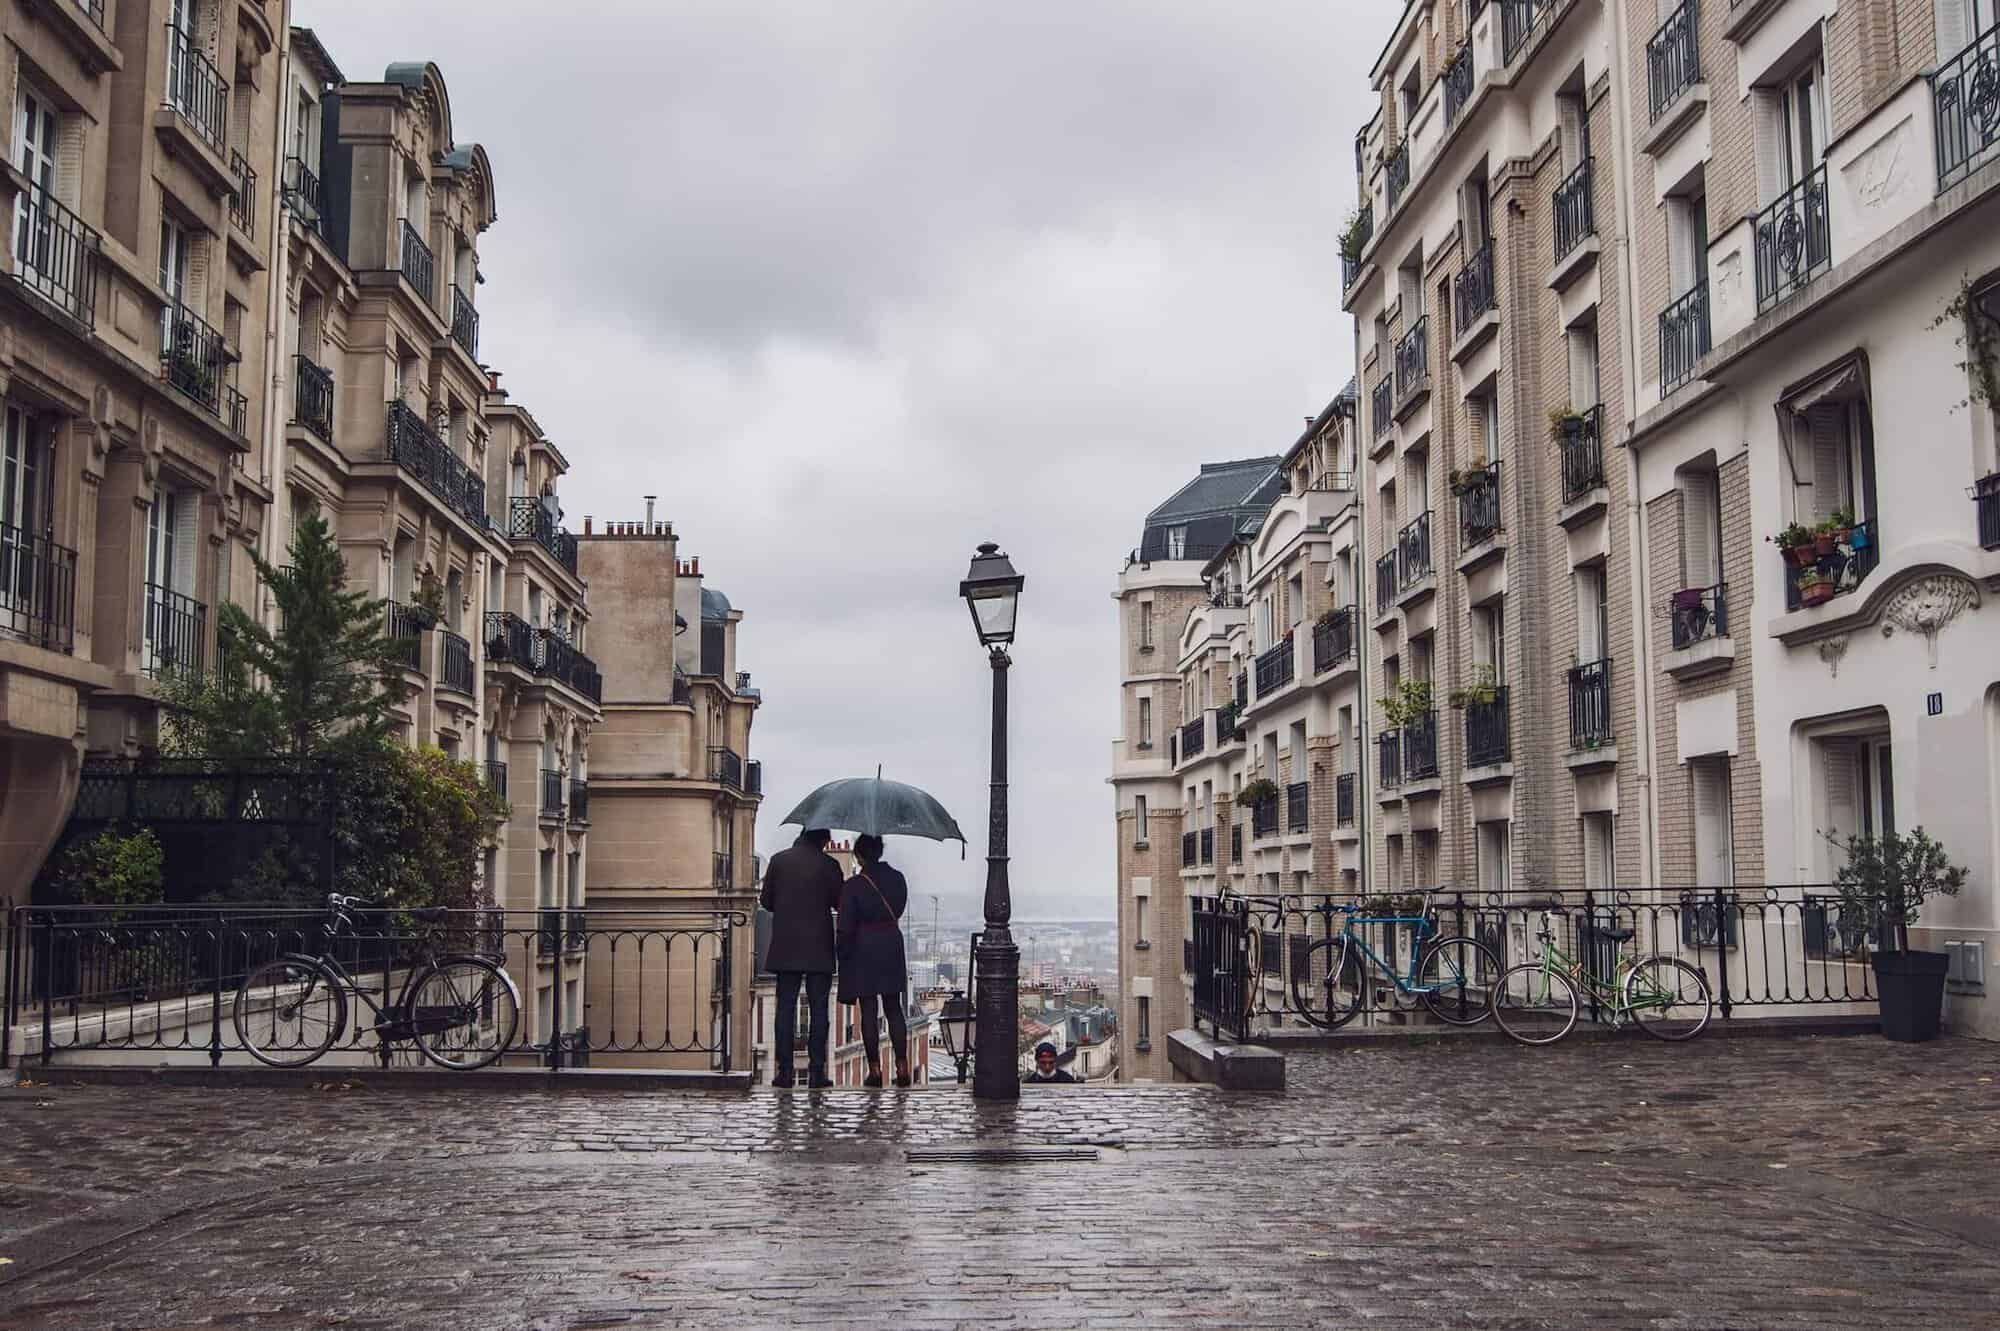 A man and a woman stand under an umbrella at the top of a flight of stairs as they overlook Paris before them. There is an old fashioned street lamp to the right of the couple and there are Parisian buildings on either side of them.